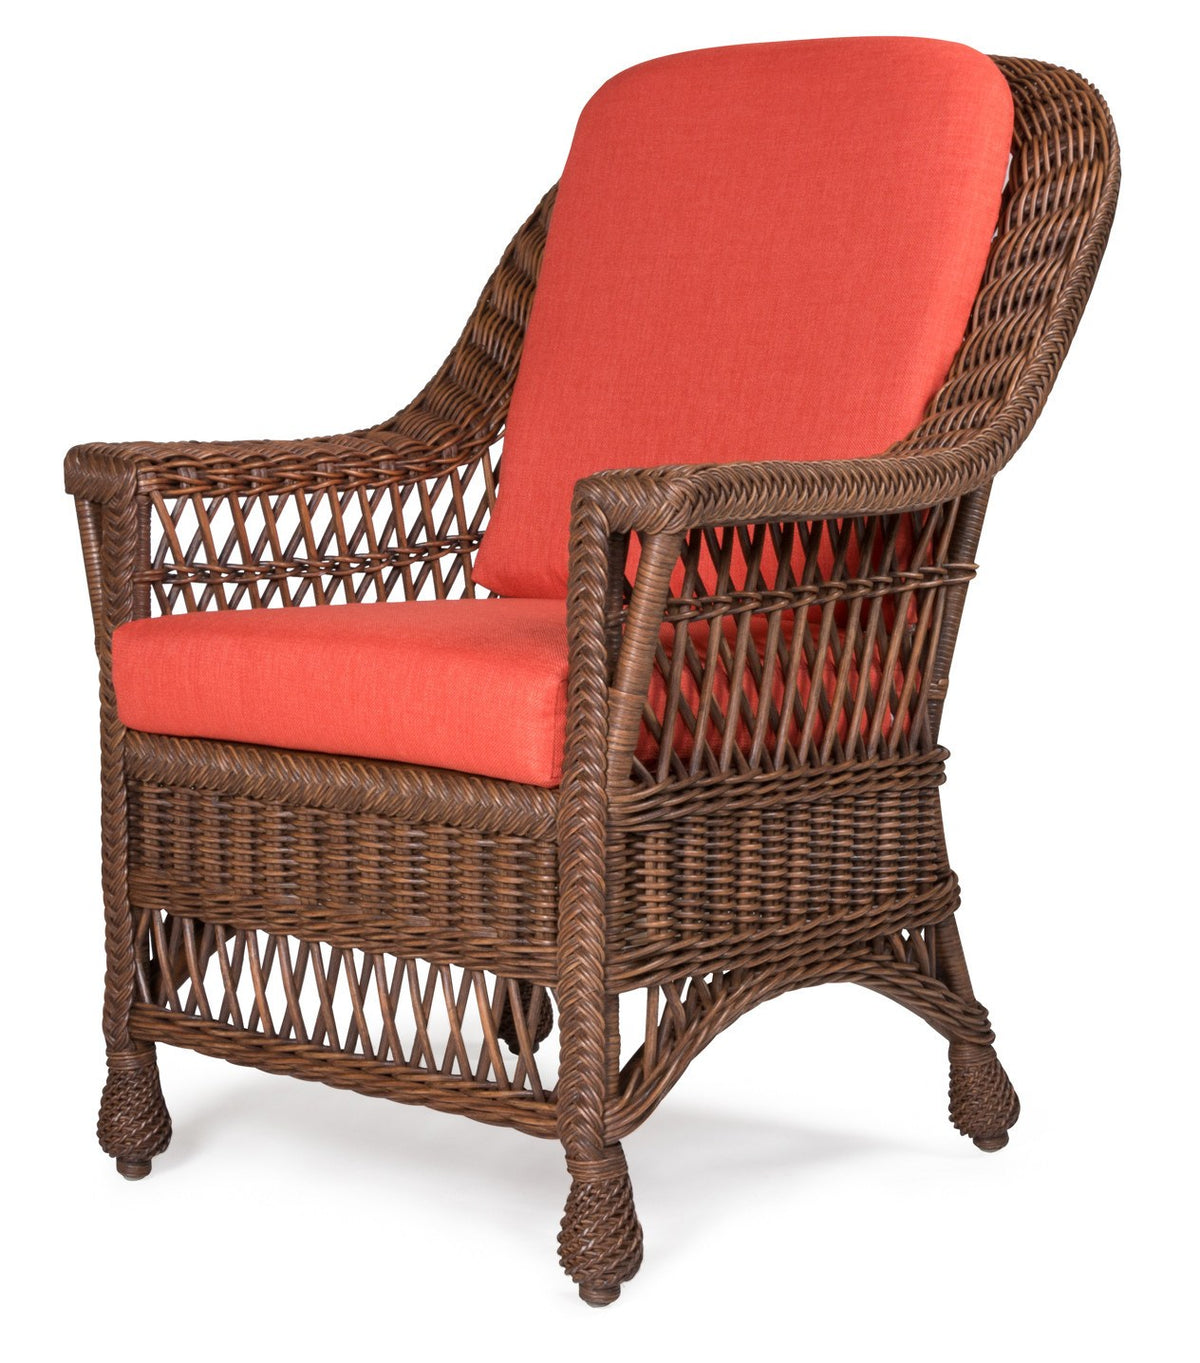 Designer Wicker &amp; Rattan By Tribor Harbor Front Dining Arm Chair by Designer Wicker from Tribor Dining Chair - Rattan Imports